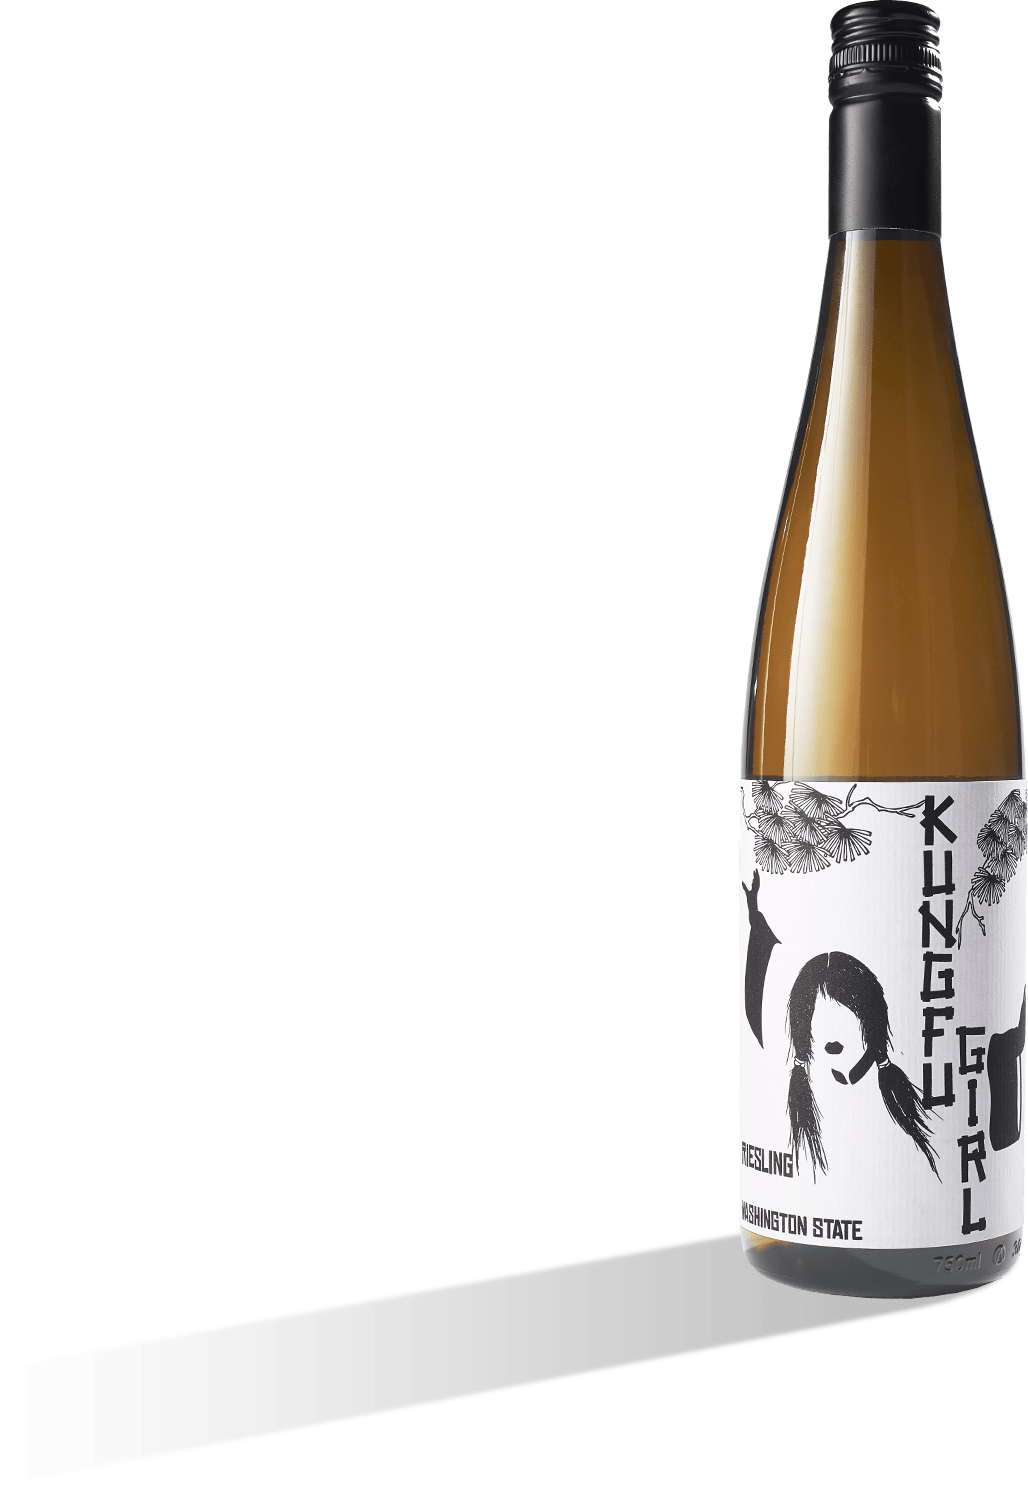 Kung Fu Girl is a dry Riesling by Charles Smith Wines from Washington State